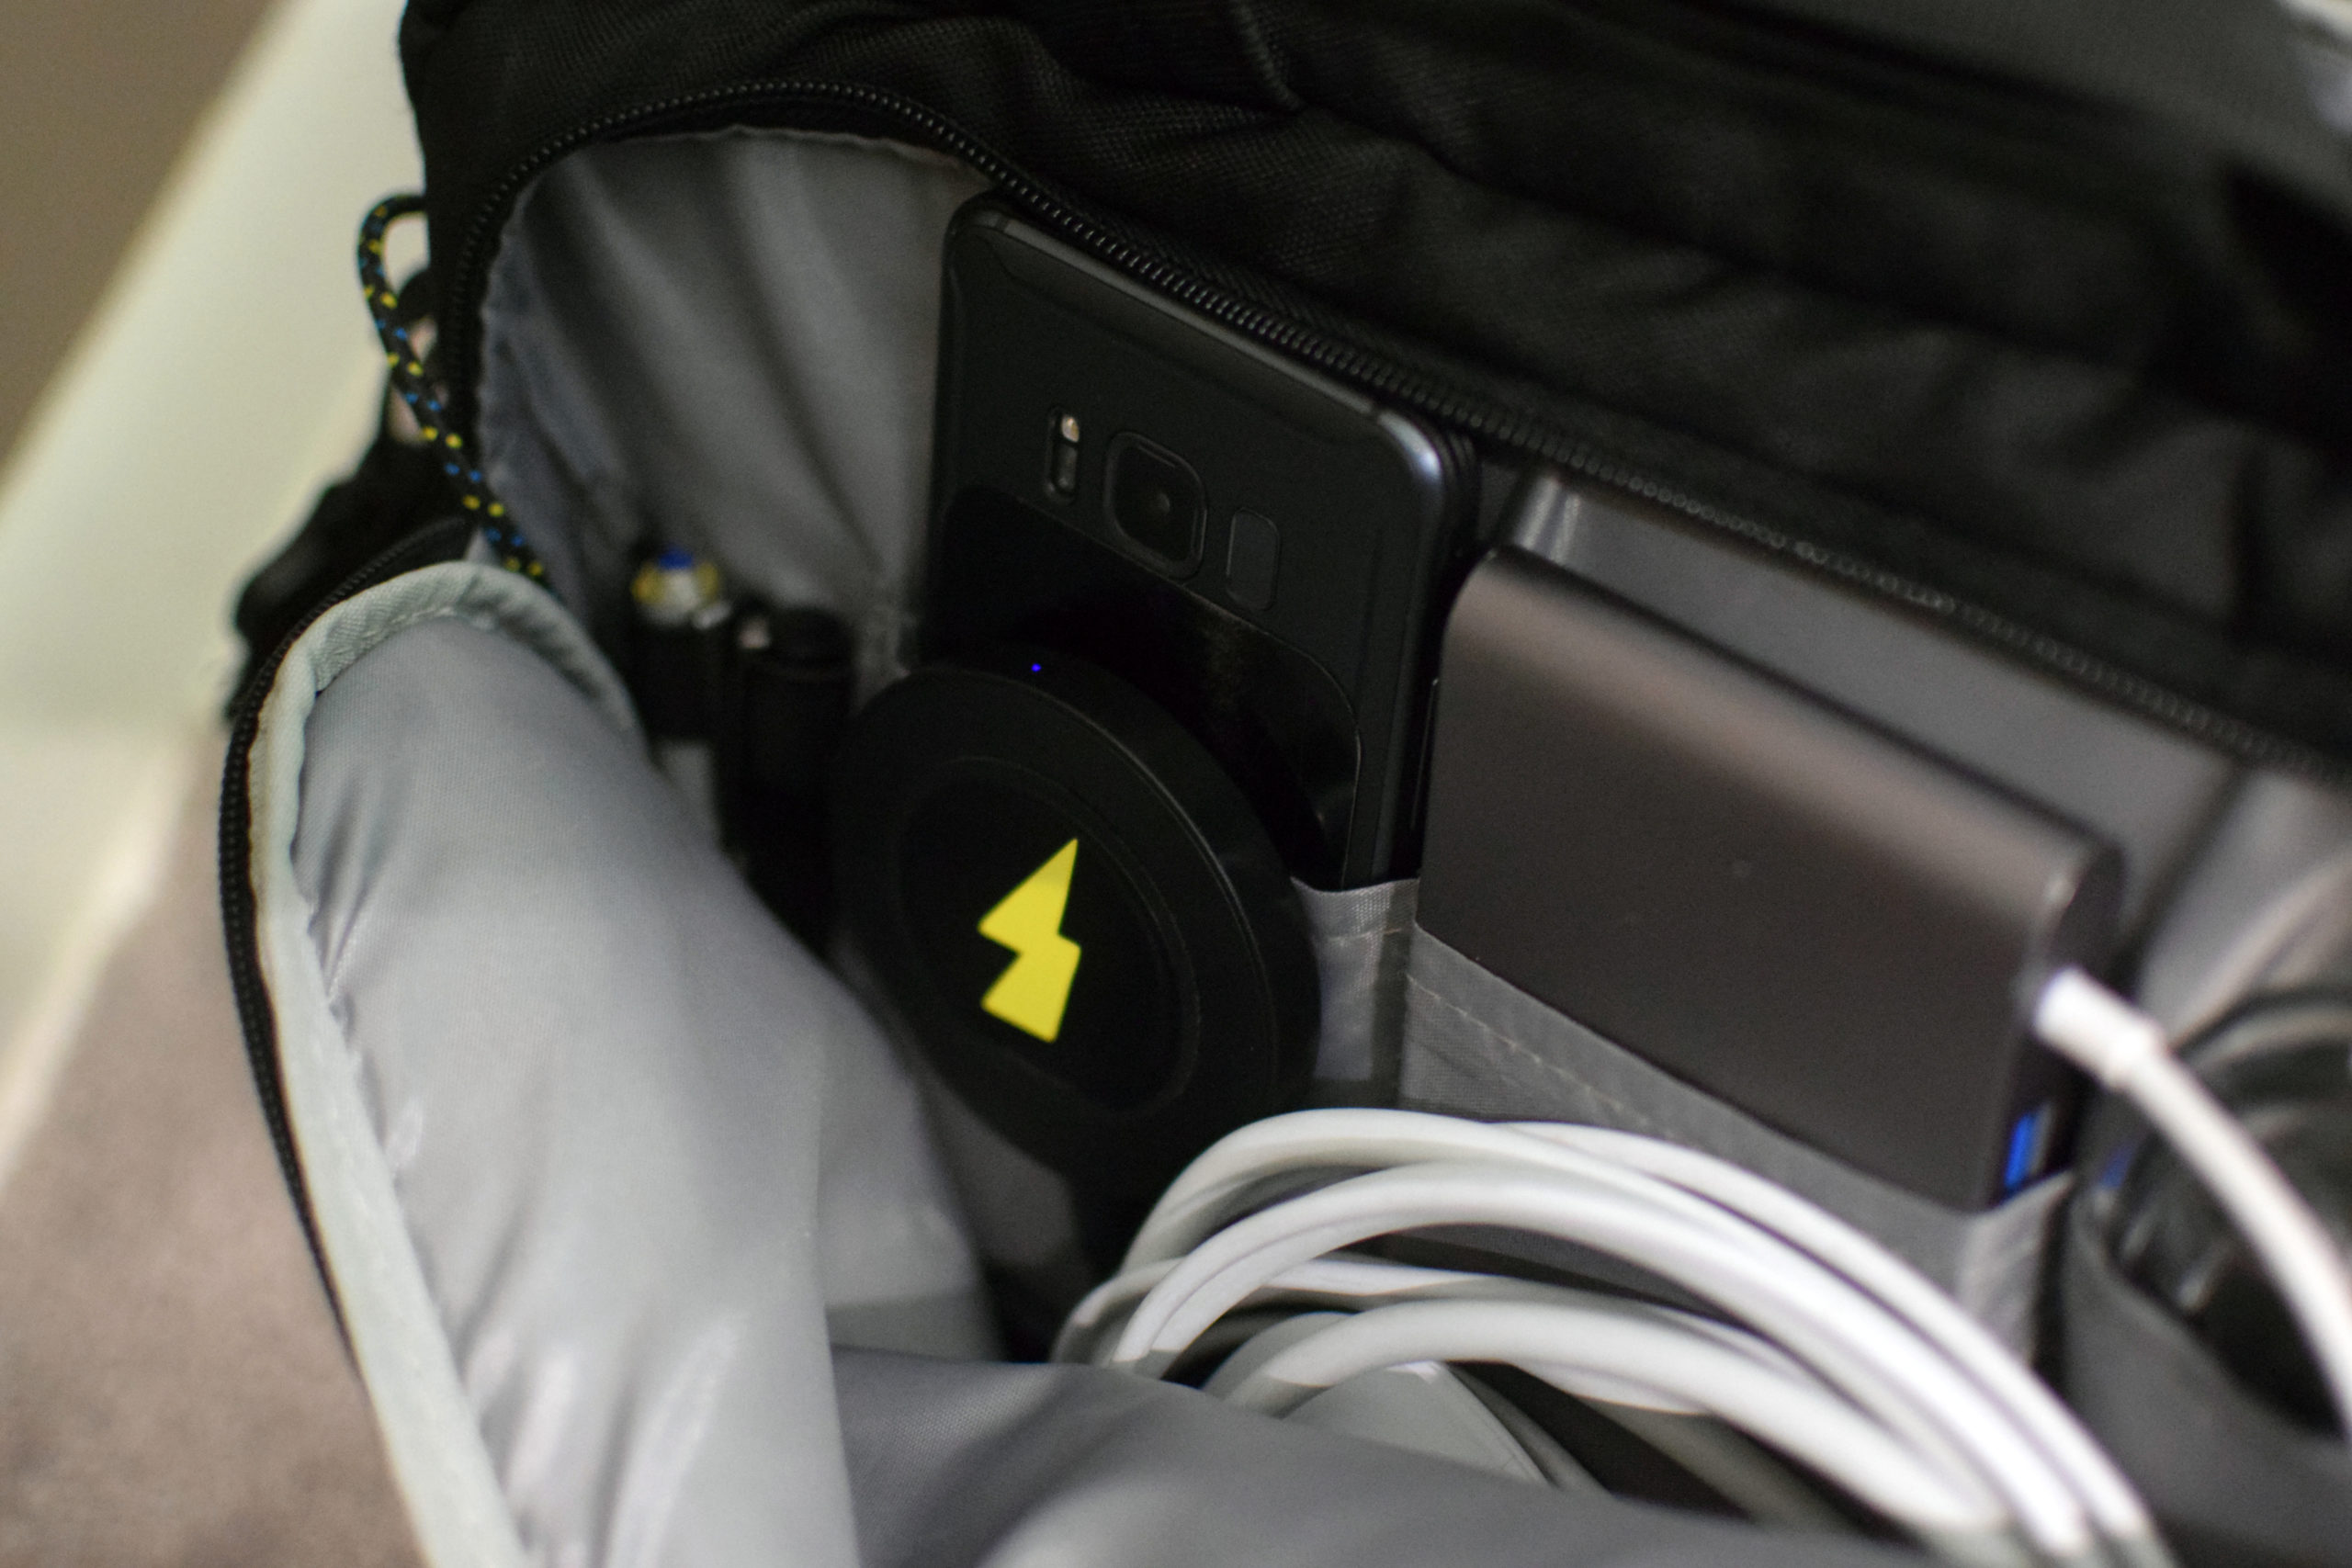 Prototype 2 of the solar battery charger bag had a wireless coil so I could drop my phone in to let it charge.